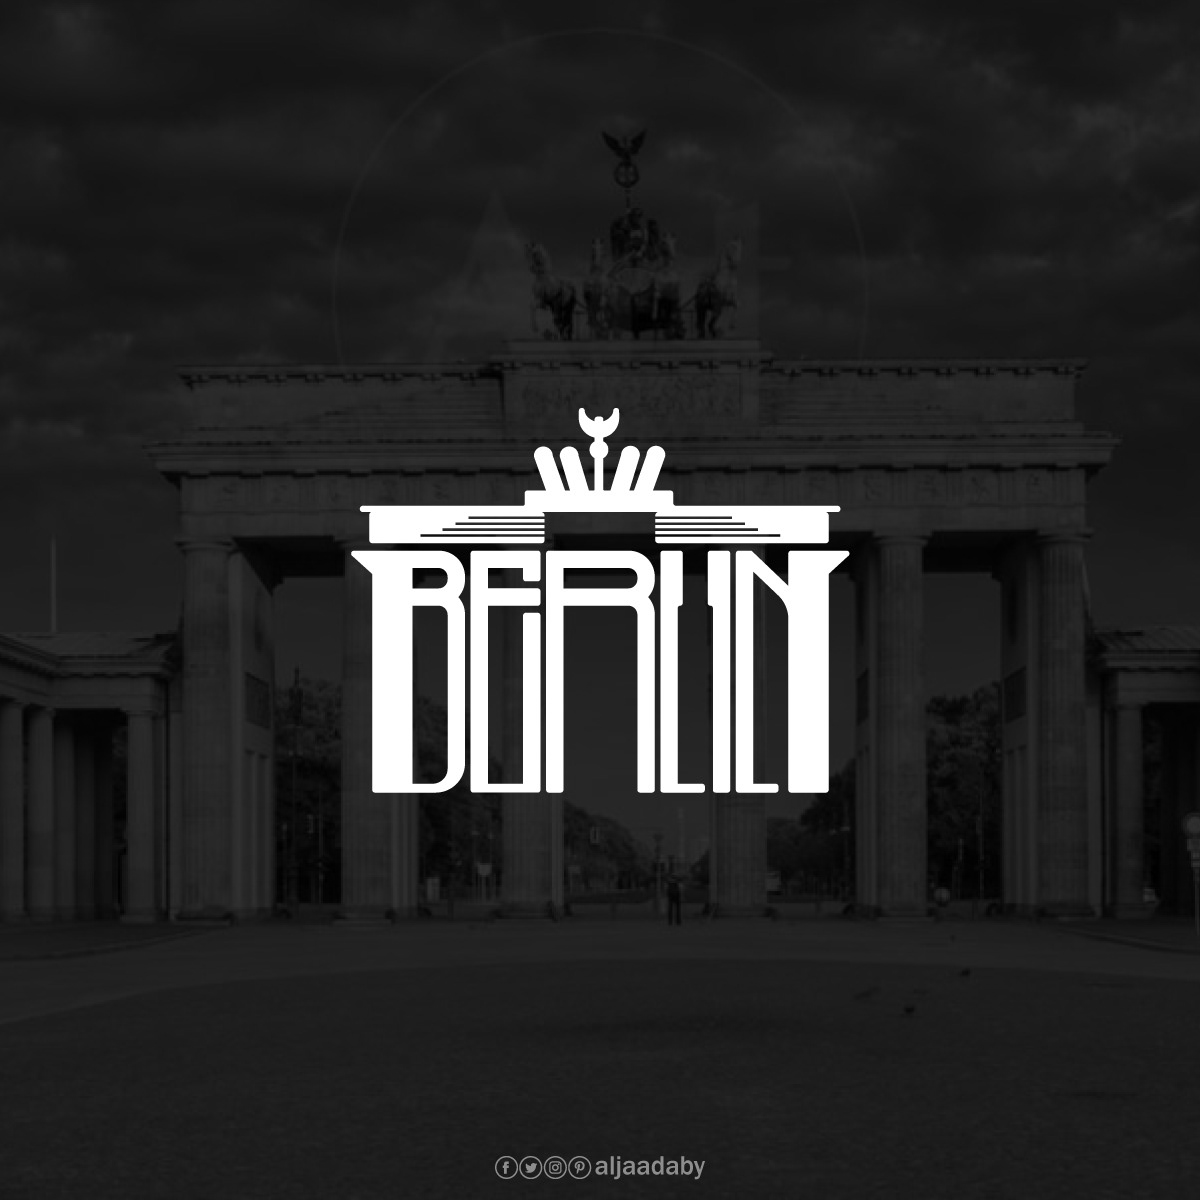 Typographic city logos based on their famous landmarks - Berlin